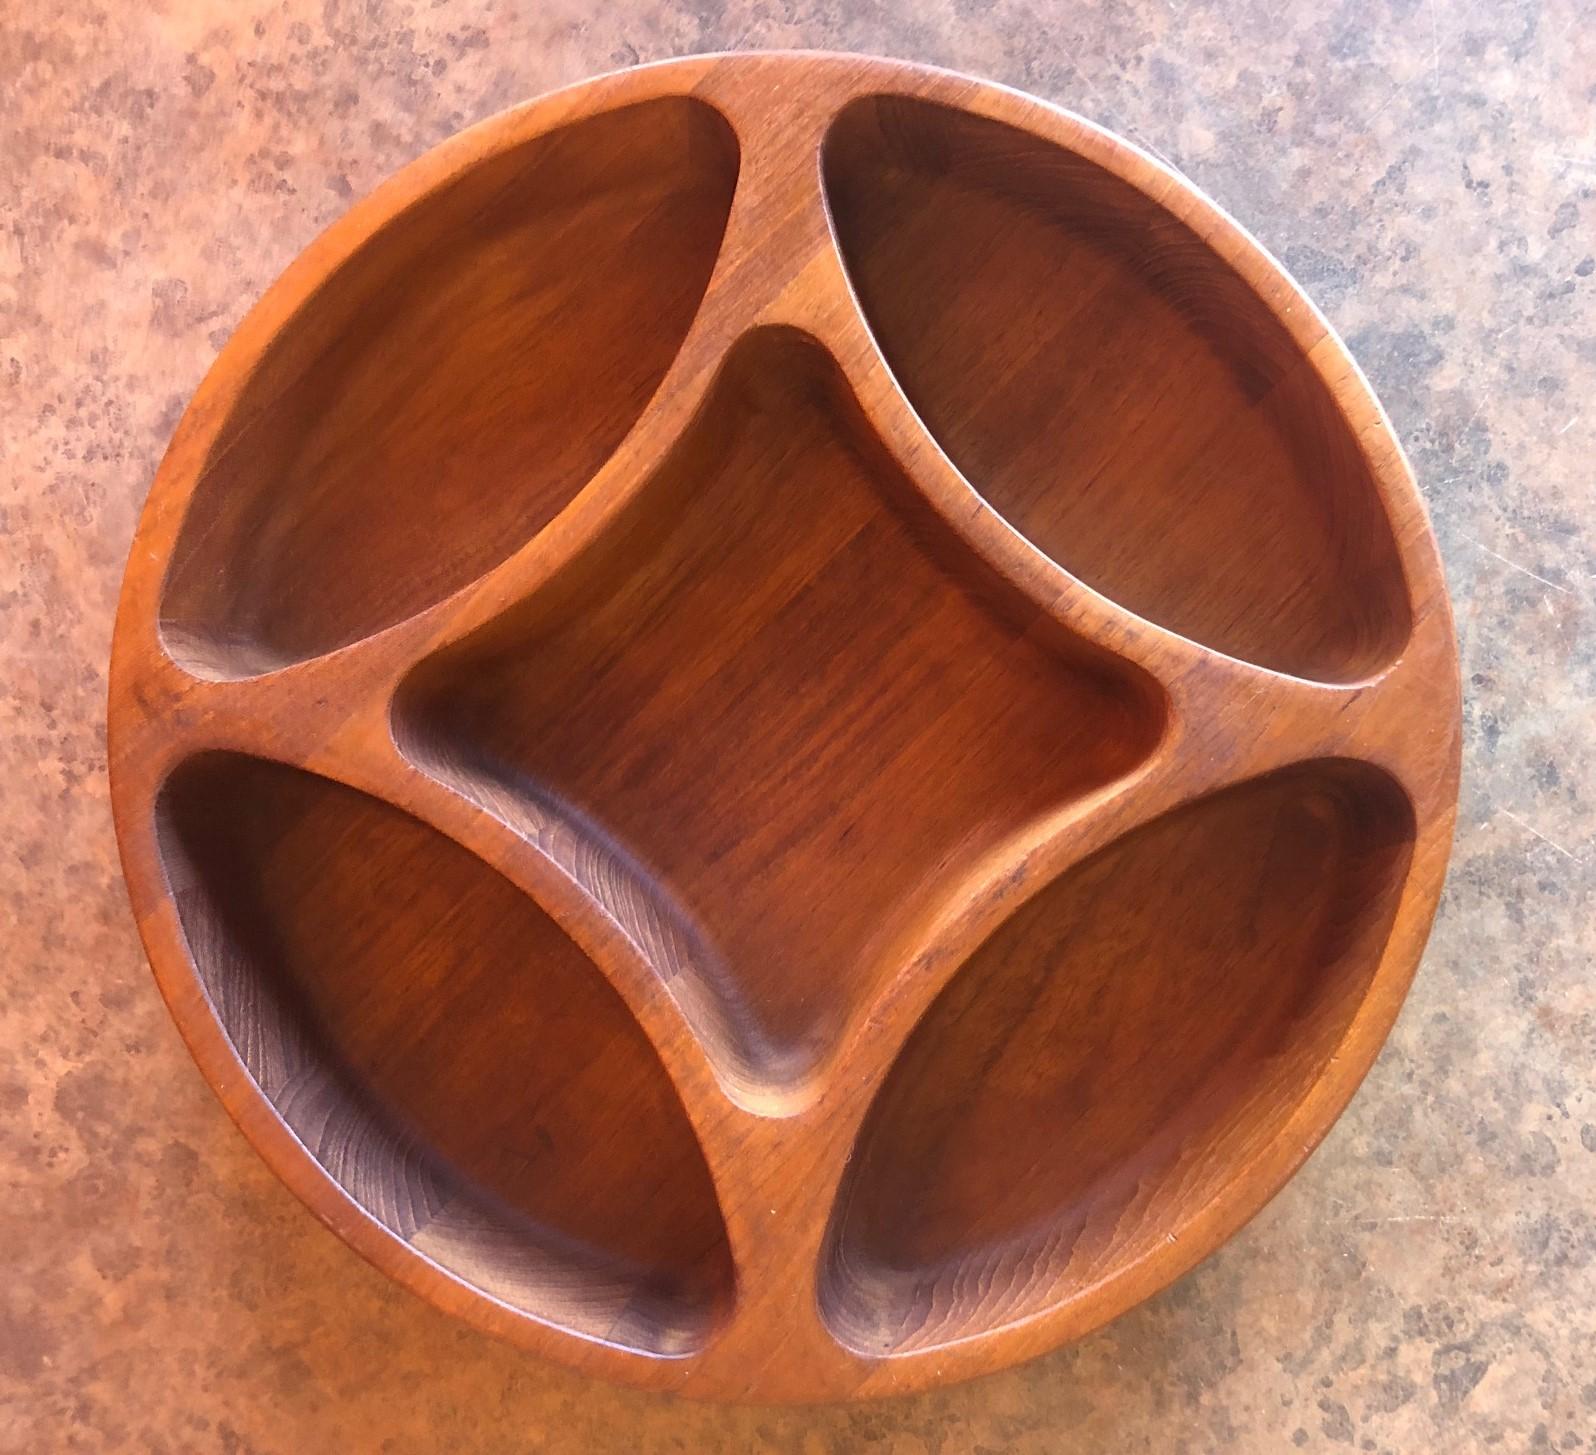 Unique divided bowl in teak by Jens Quistgaard for Dansk, circa 1970s. The bowl is quite functional with five different walled sections and is in excellent condition.